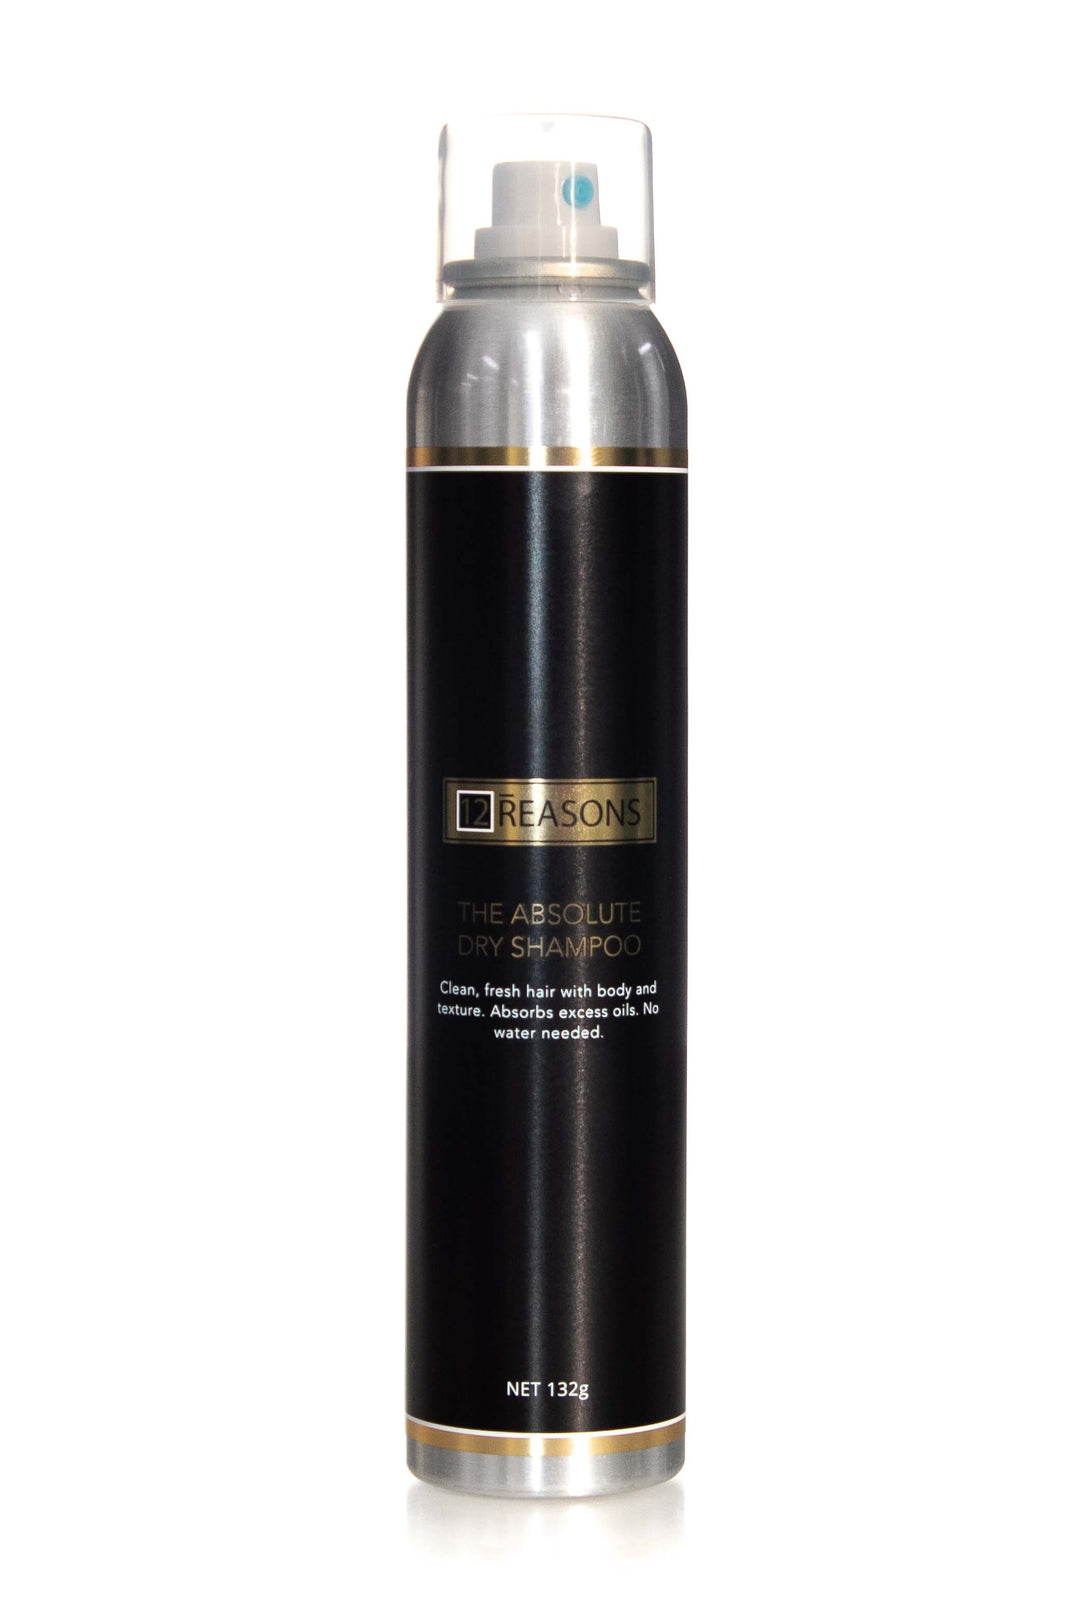 12 REASONS THE ABSOLUTE DRY SHAMPOO 132G